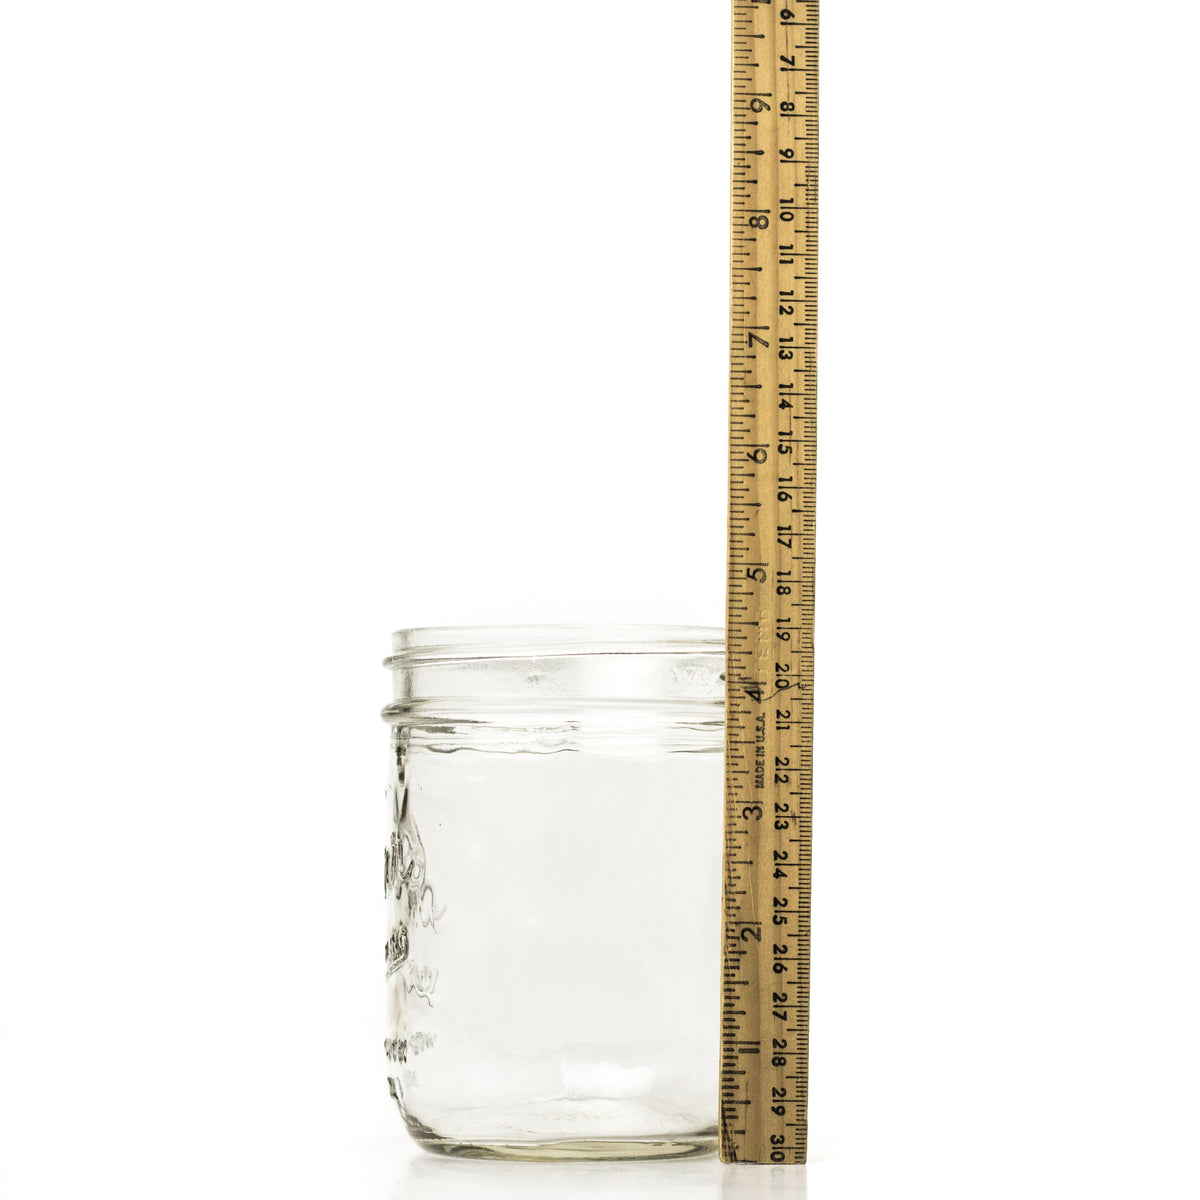 Wide mouth pint mason jar side view with a ruler for height comparison